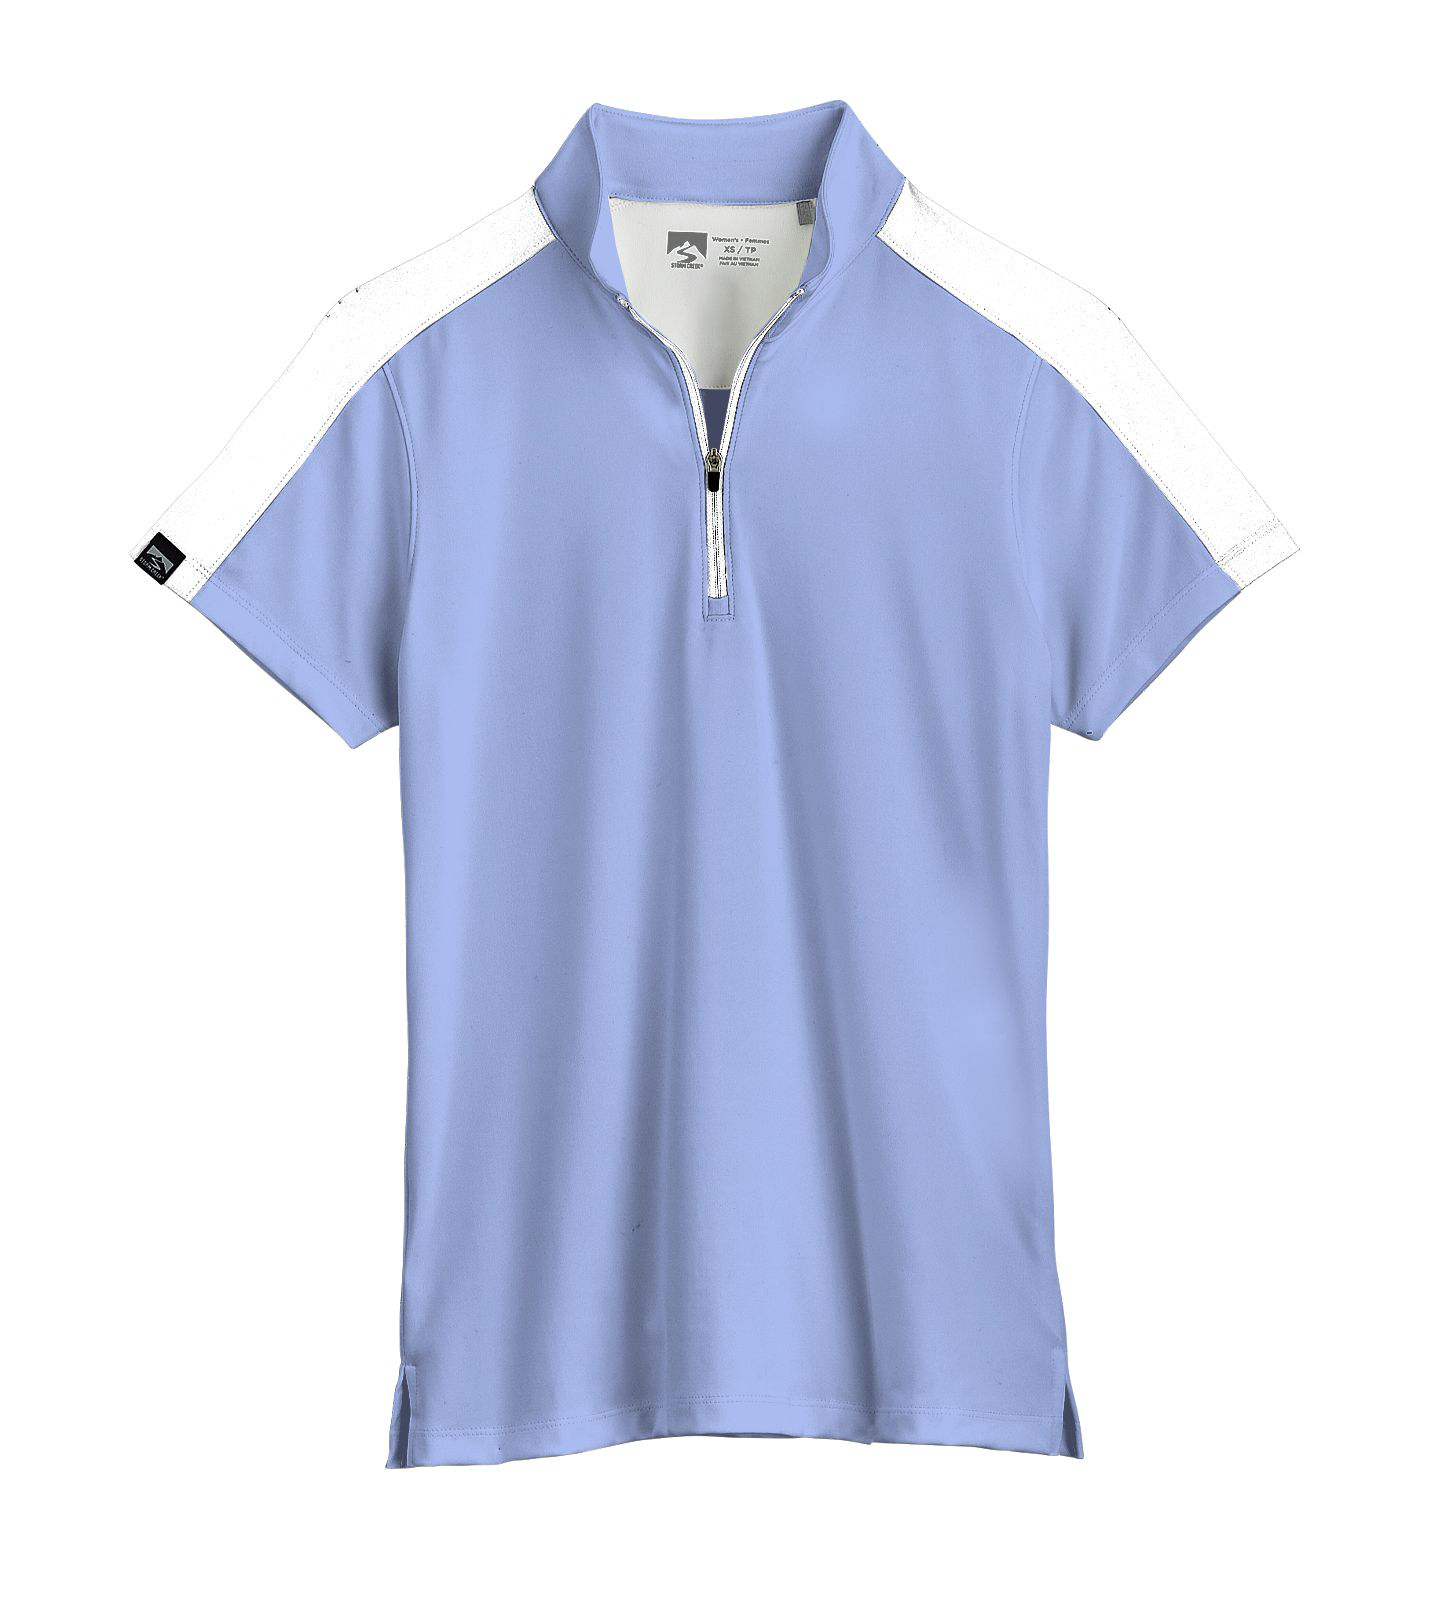 Storm Creek Activator Short-Sleeve Polo Shirt for Ladies - Peri Blue/White - M